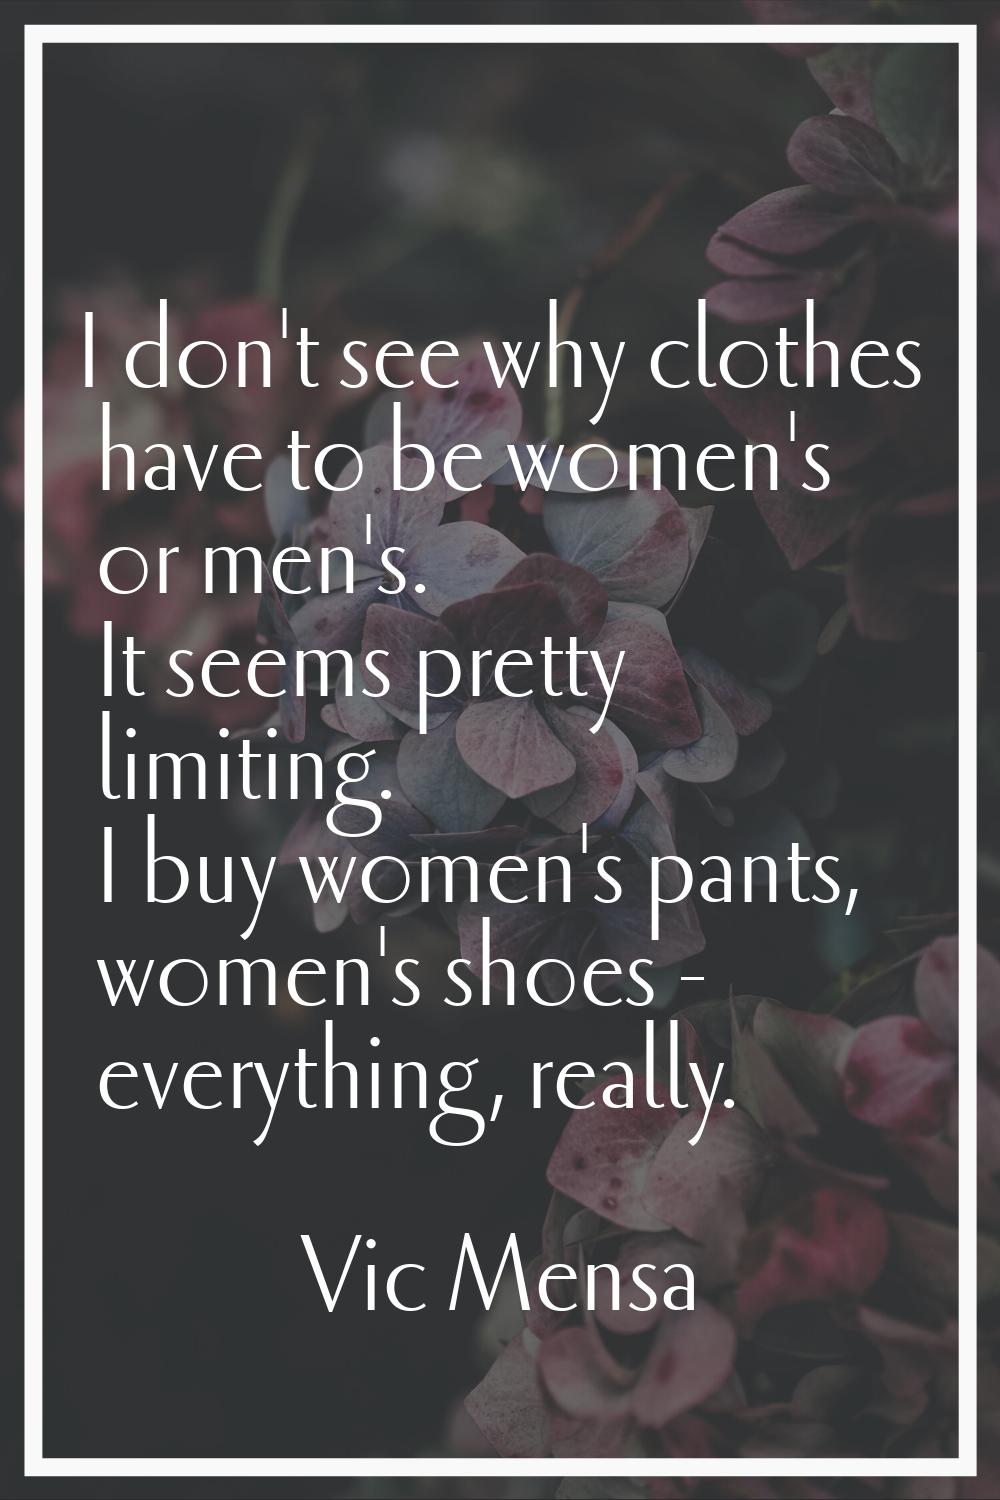 I don't see why clothes have to be women's or men's. It seems pretty limiting. I buy women's pants,